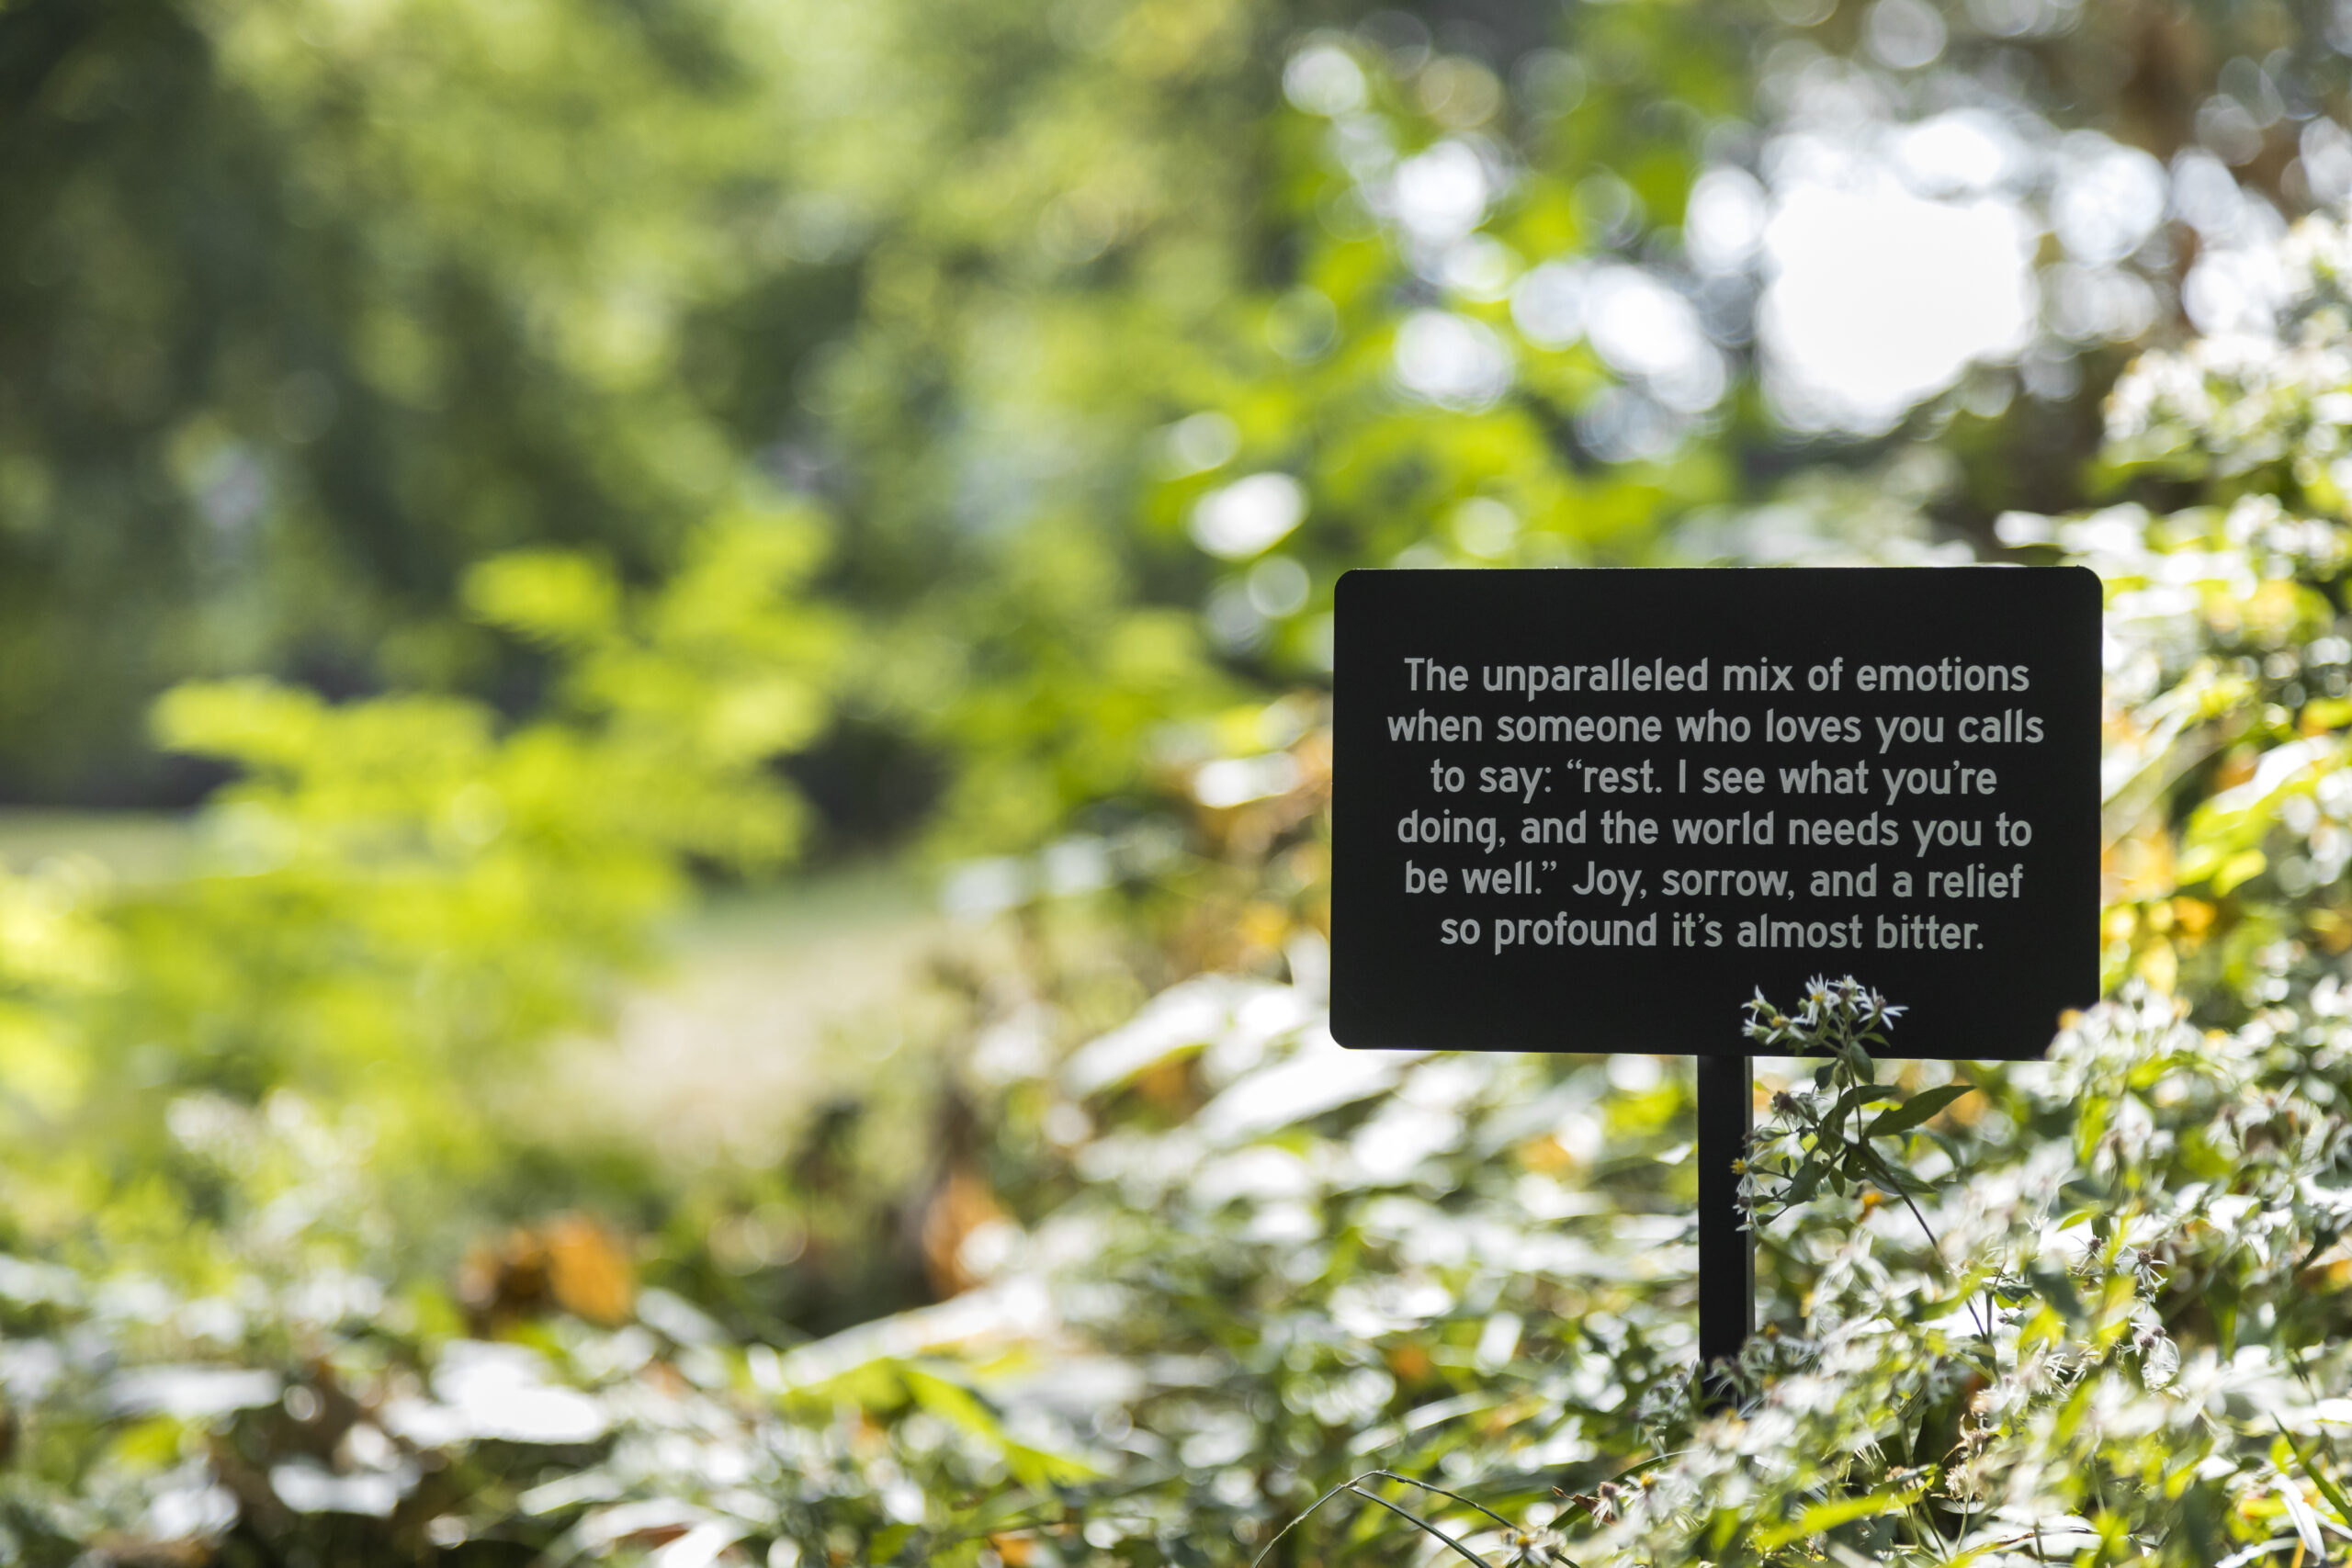 A small horticultural sign set in leaves that reads "The unparalleled mix of emotions when someone who loves you calls to say: 'rest. I see what you're doing, and the world needs you to be well.' Joy, sorrow, and a relief so profound it's almost bitter."